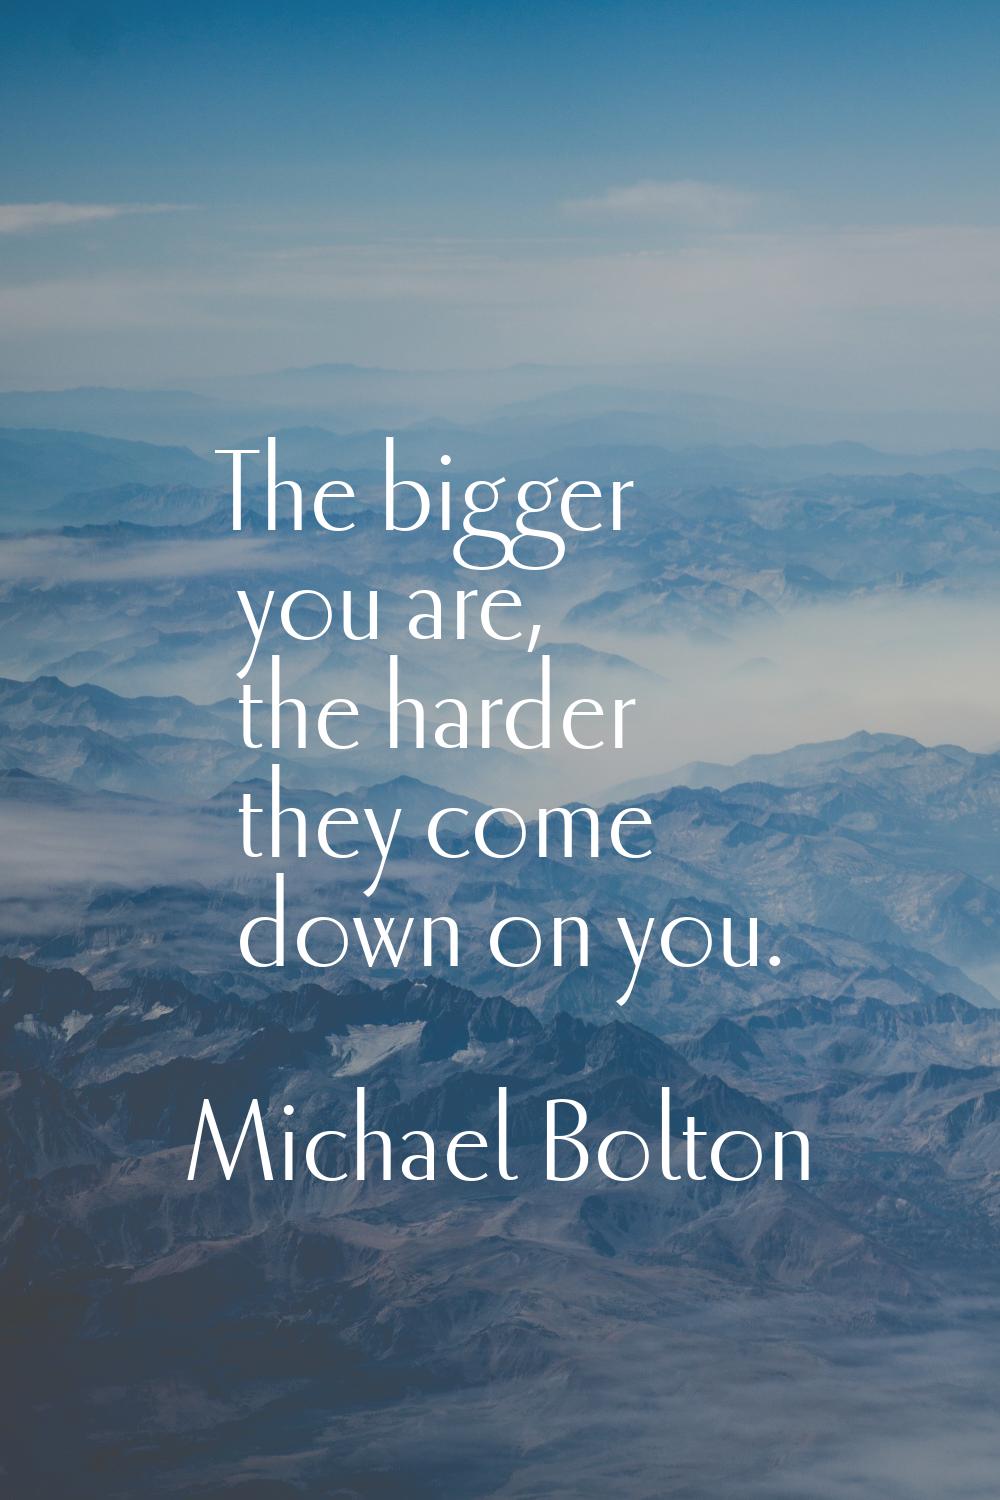 The bigger you are, the harder they come down on you.